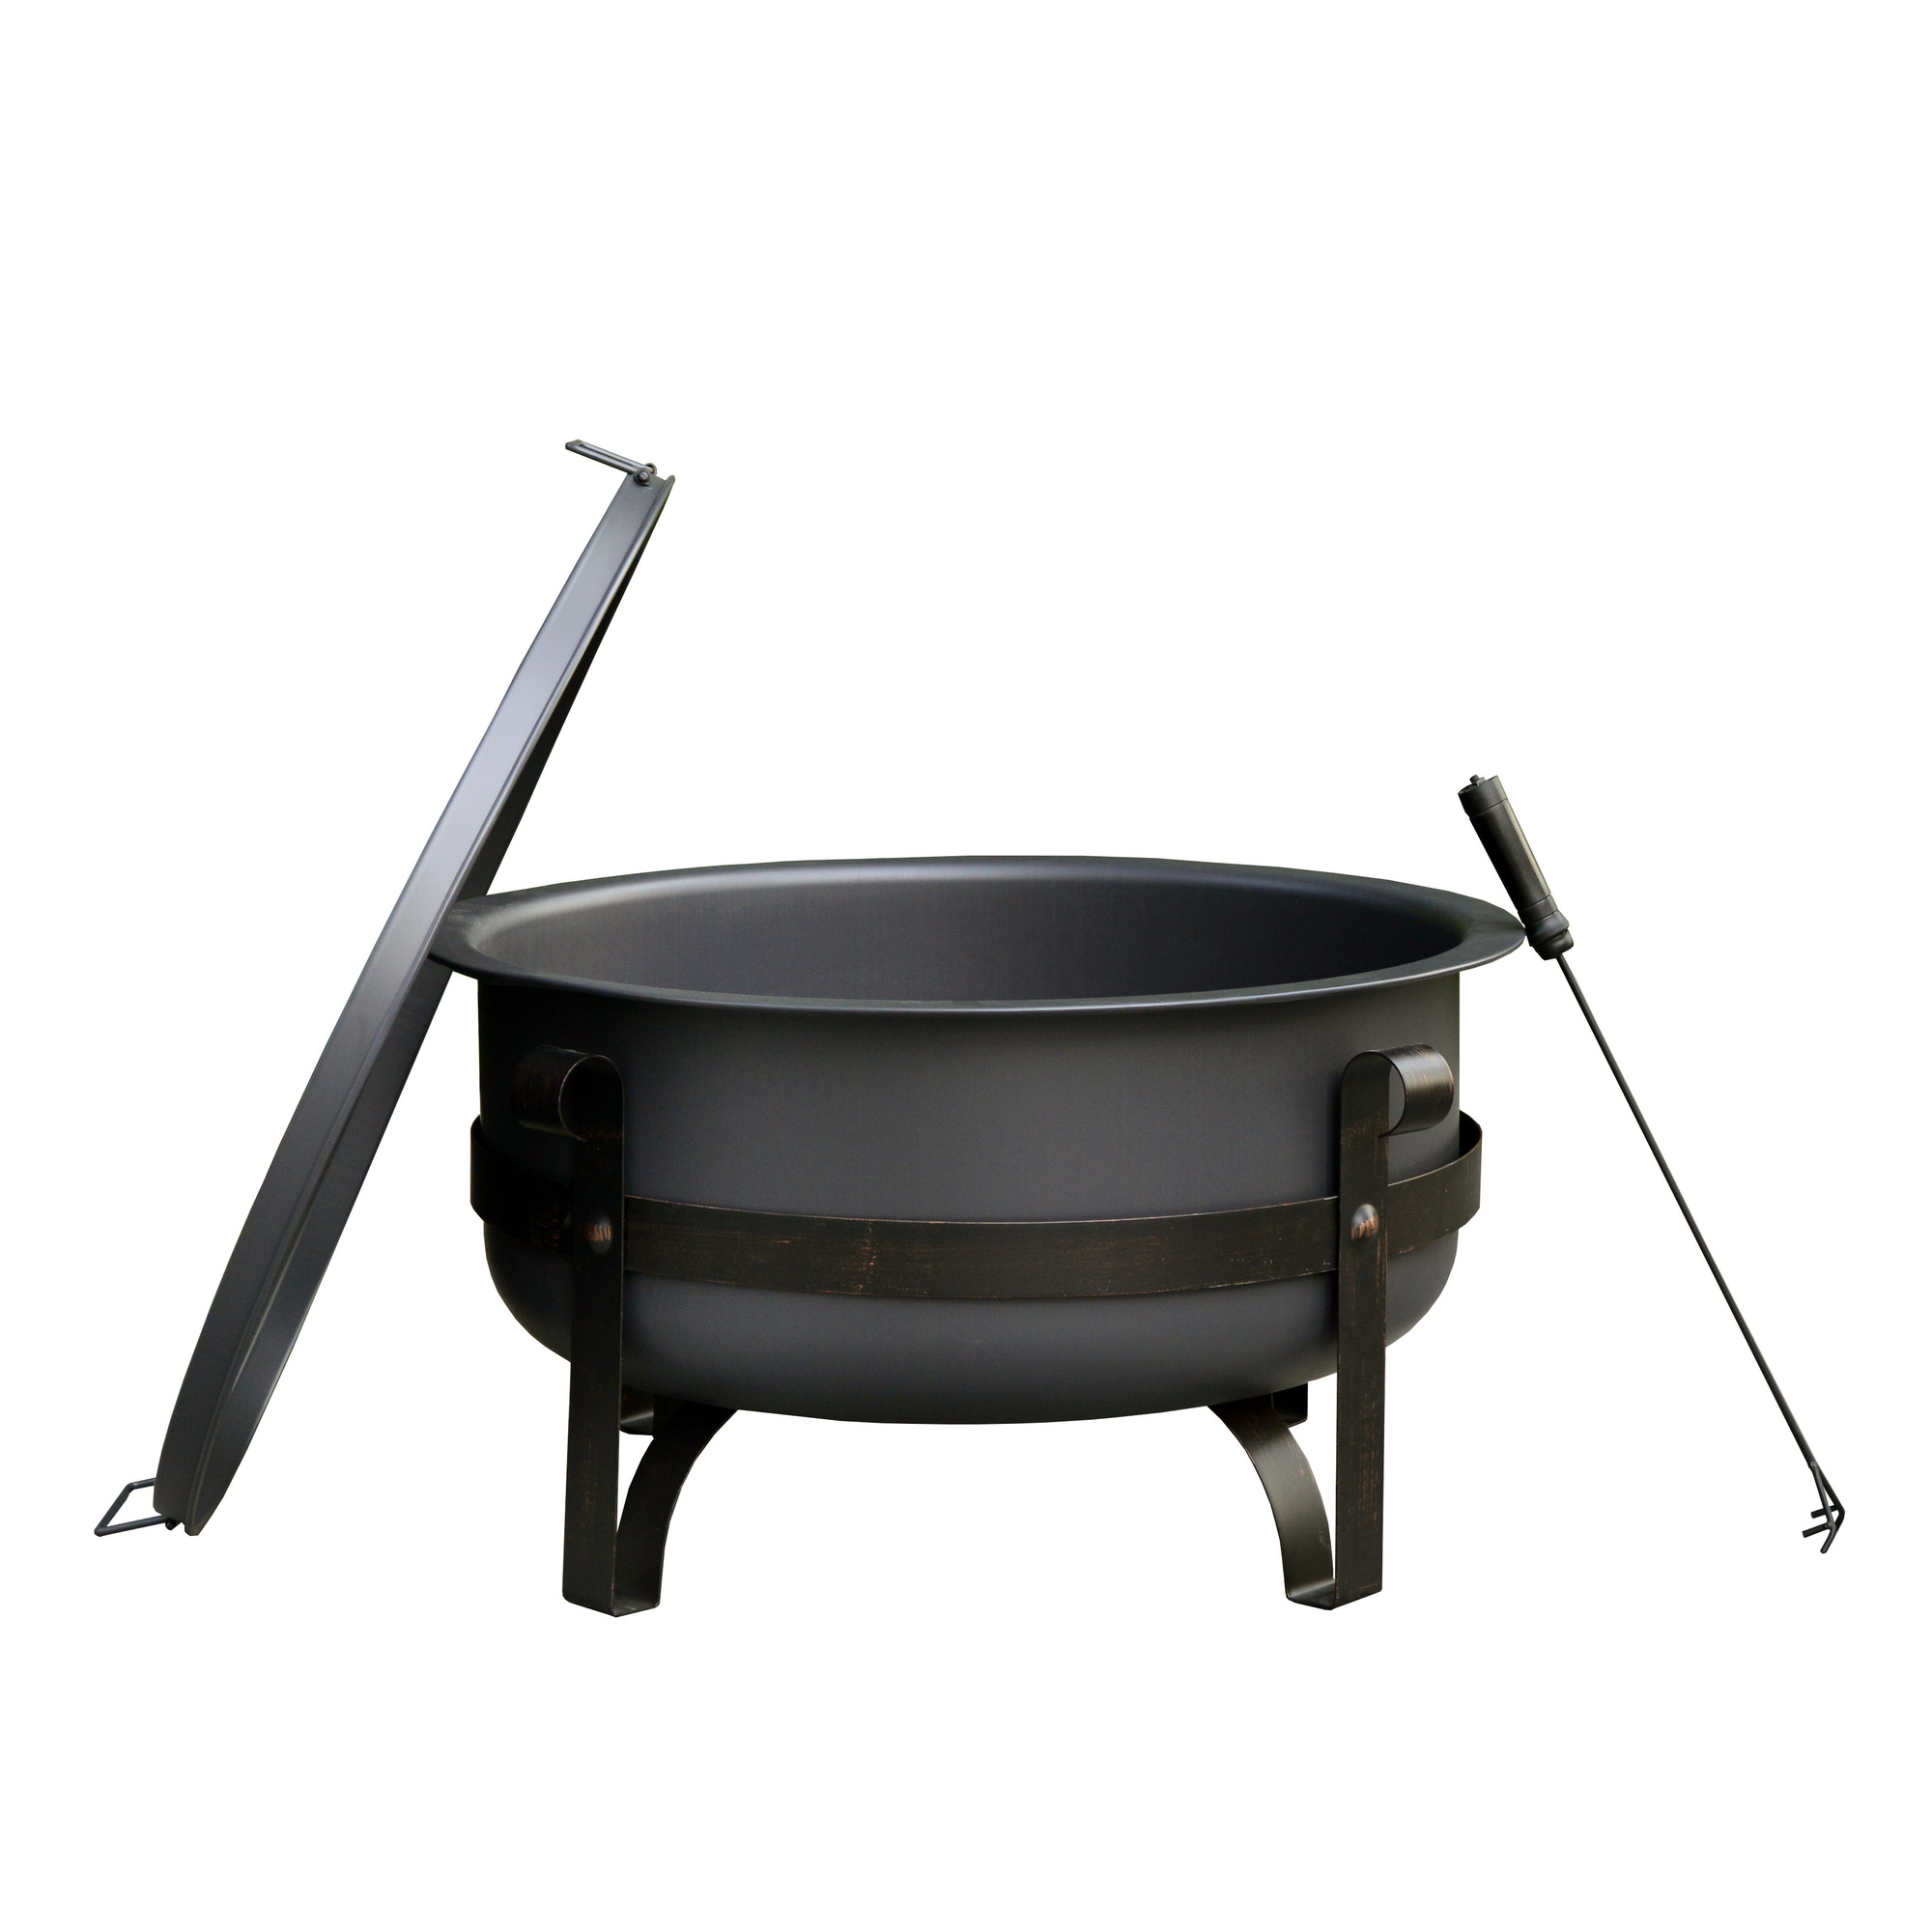 Bond, Essex Wood Burning Fire Pit, Fuel Type Wood, Diameter 32.91 in, Material Combination, Model 52129